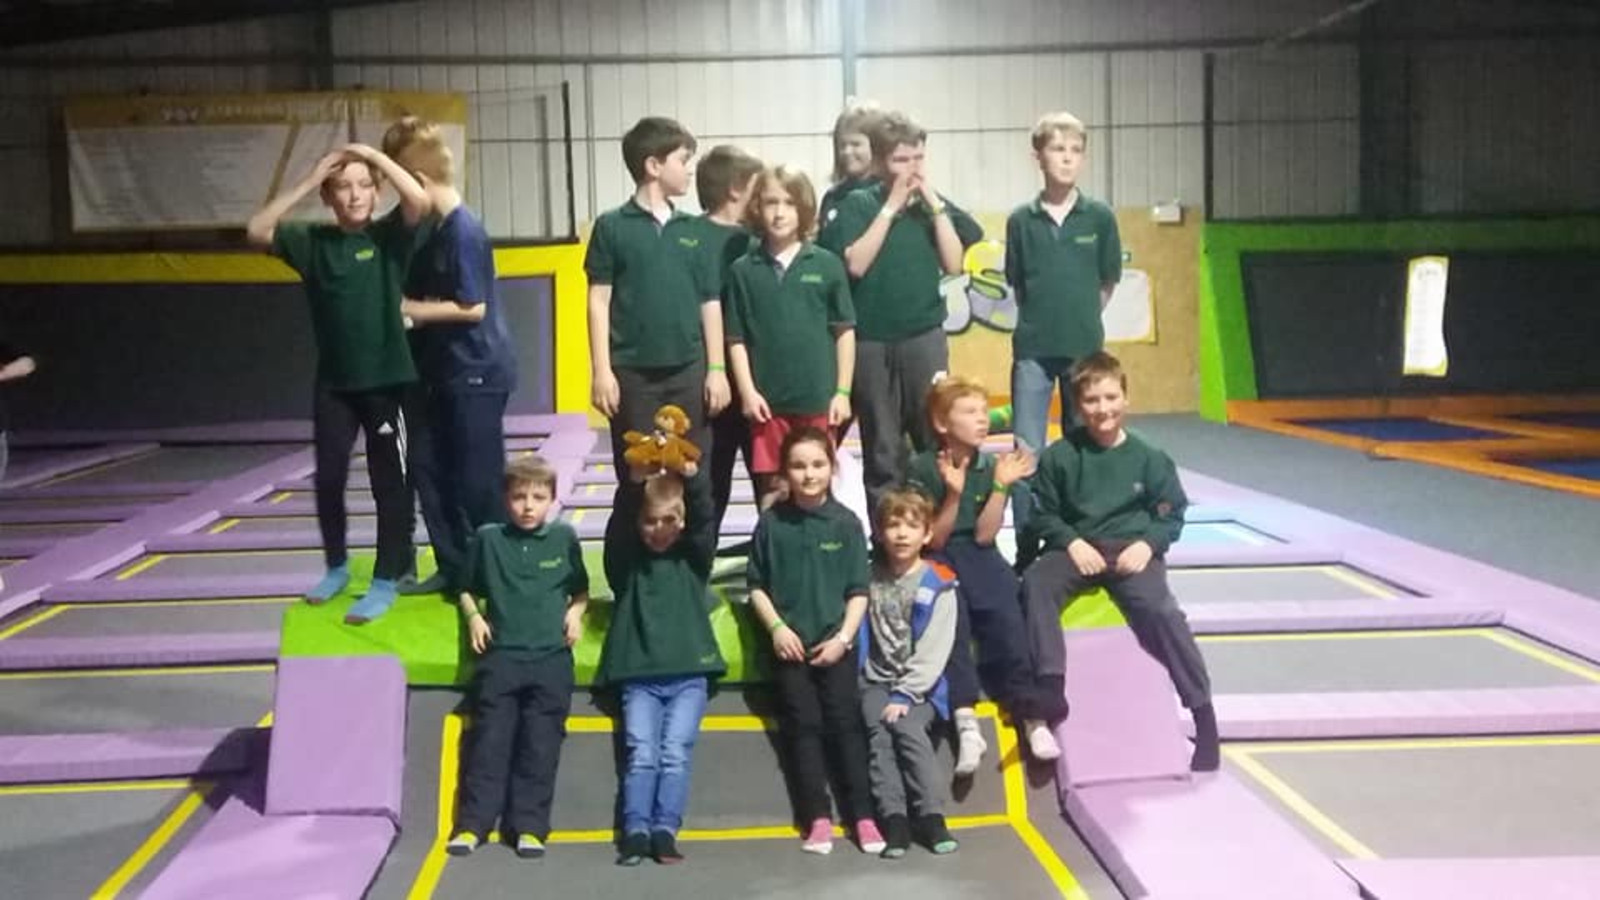 A Visit to the Trampoline Park